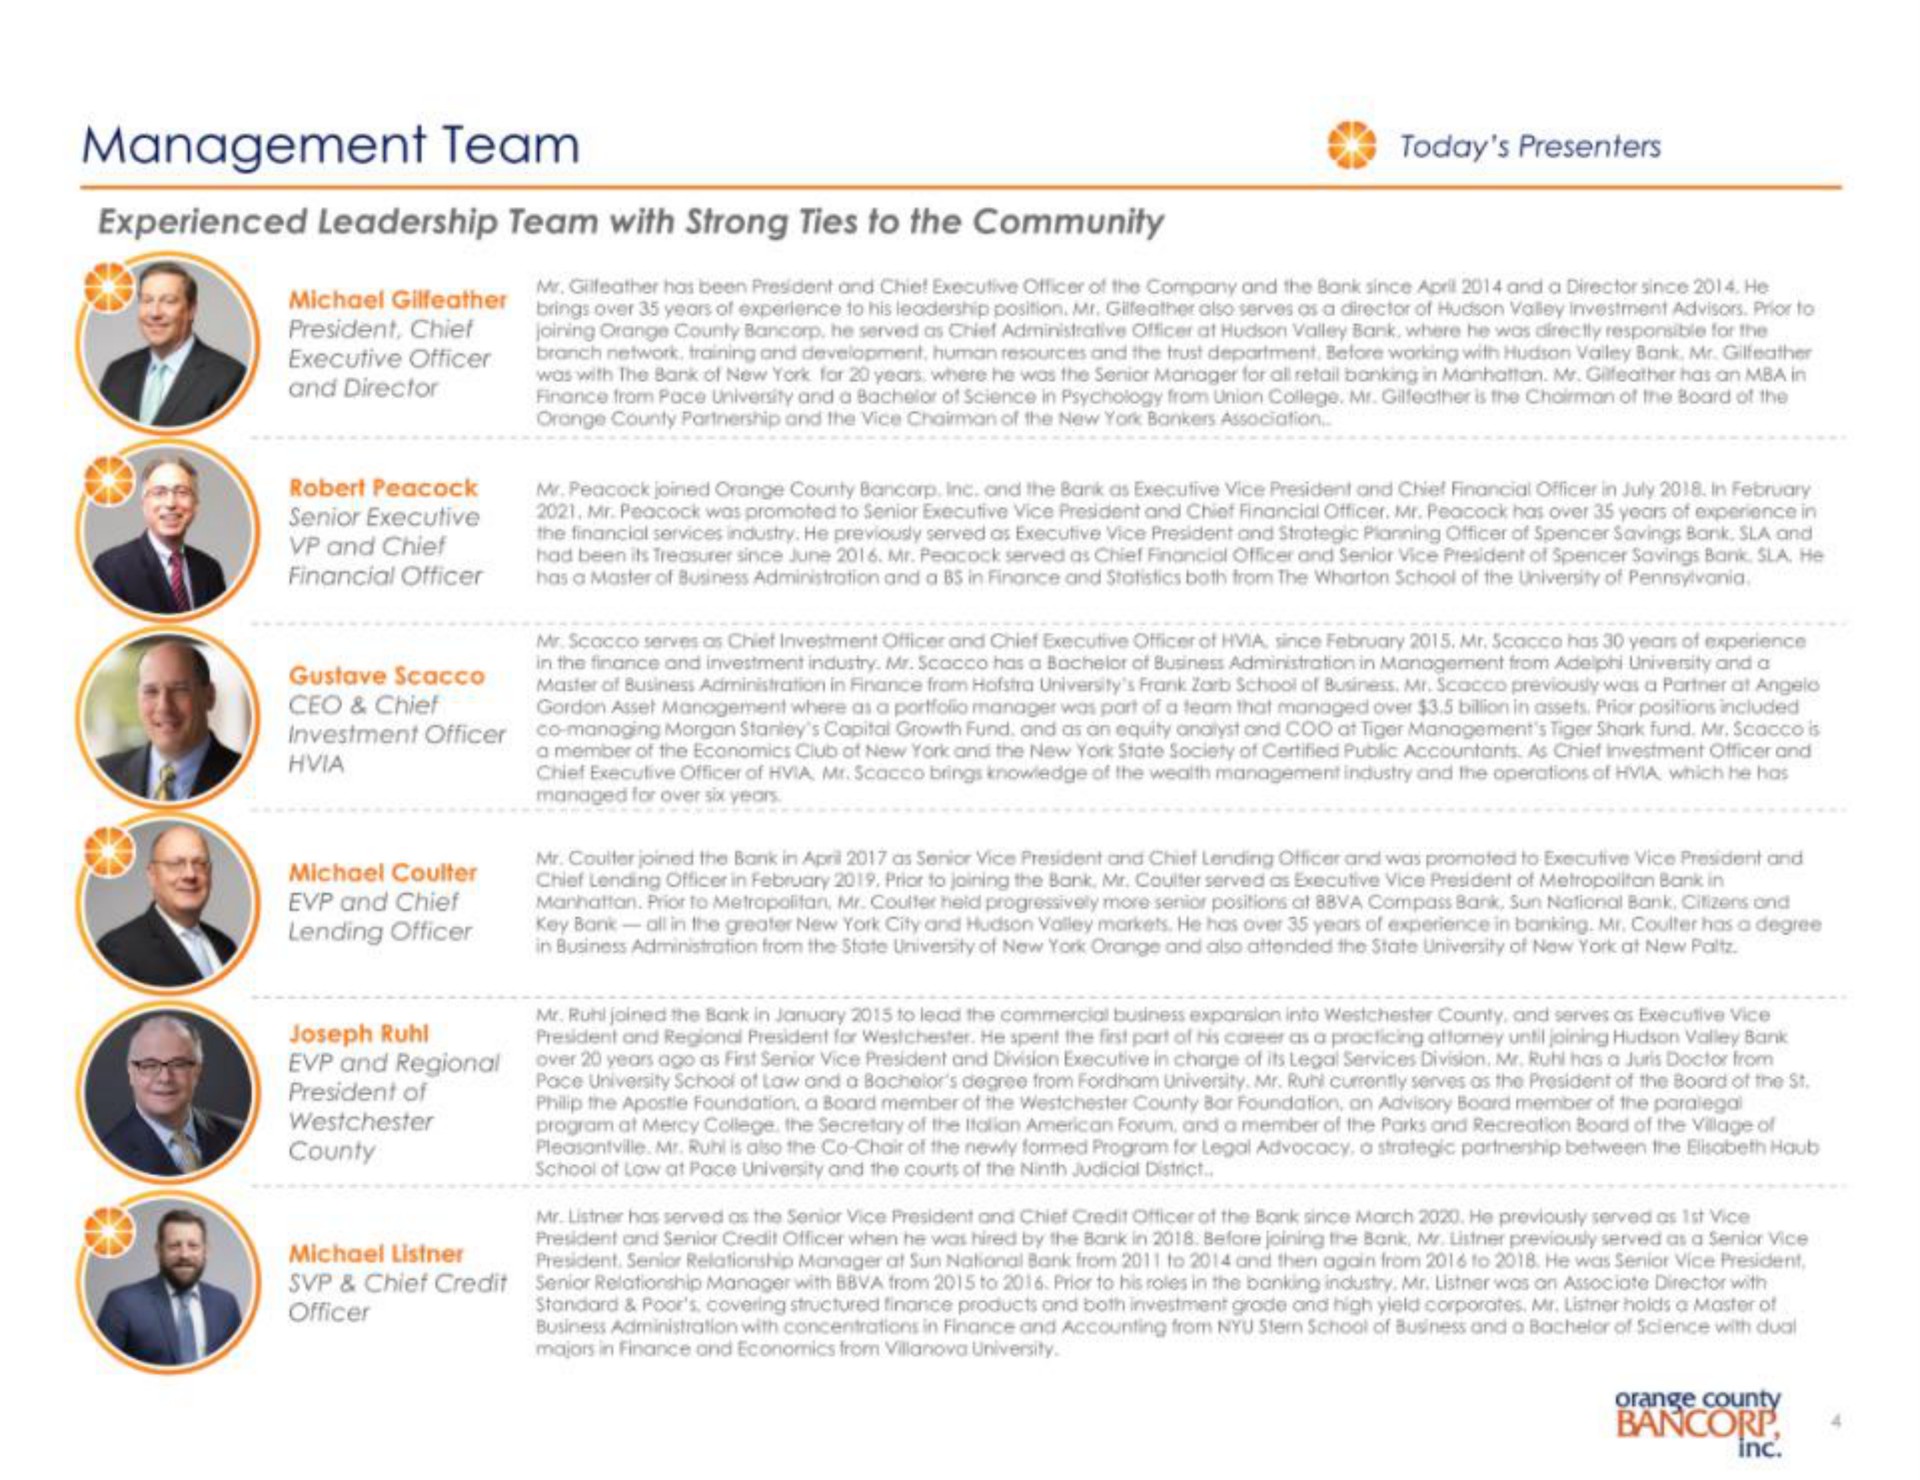 management team today presenters | Orange County Bancorp